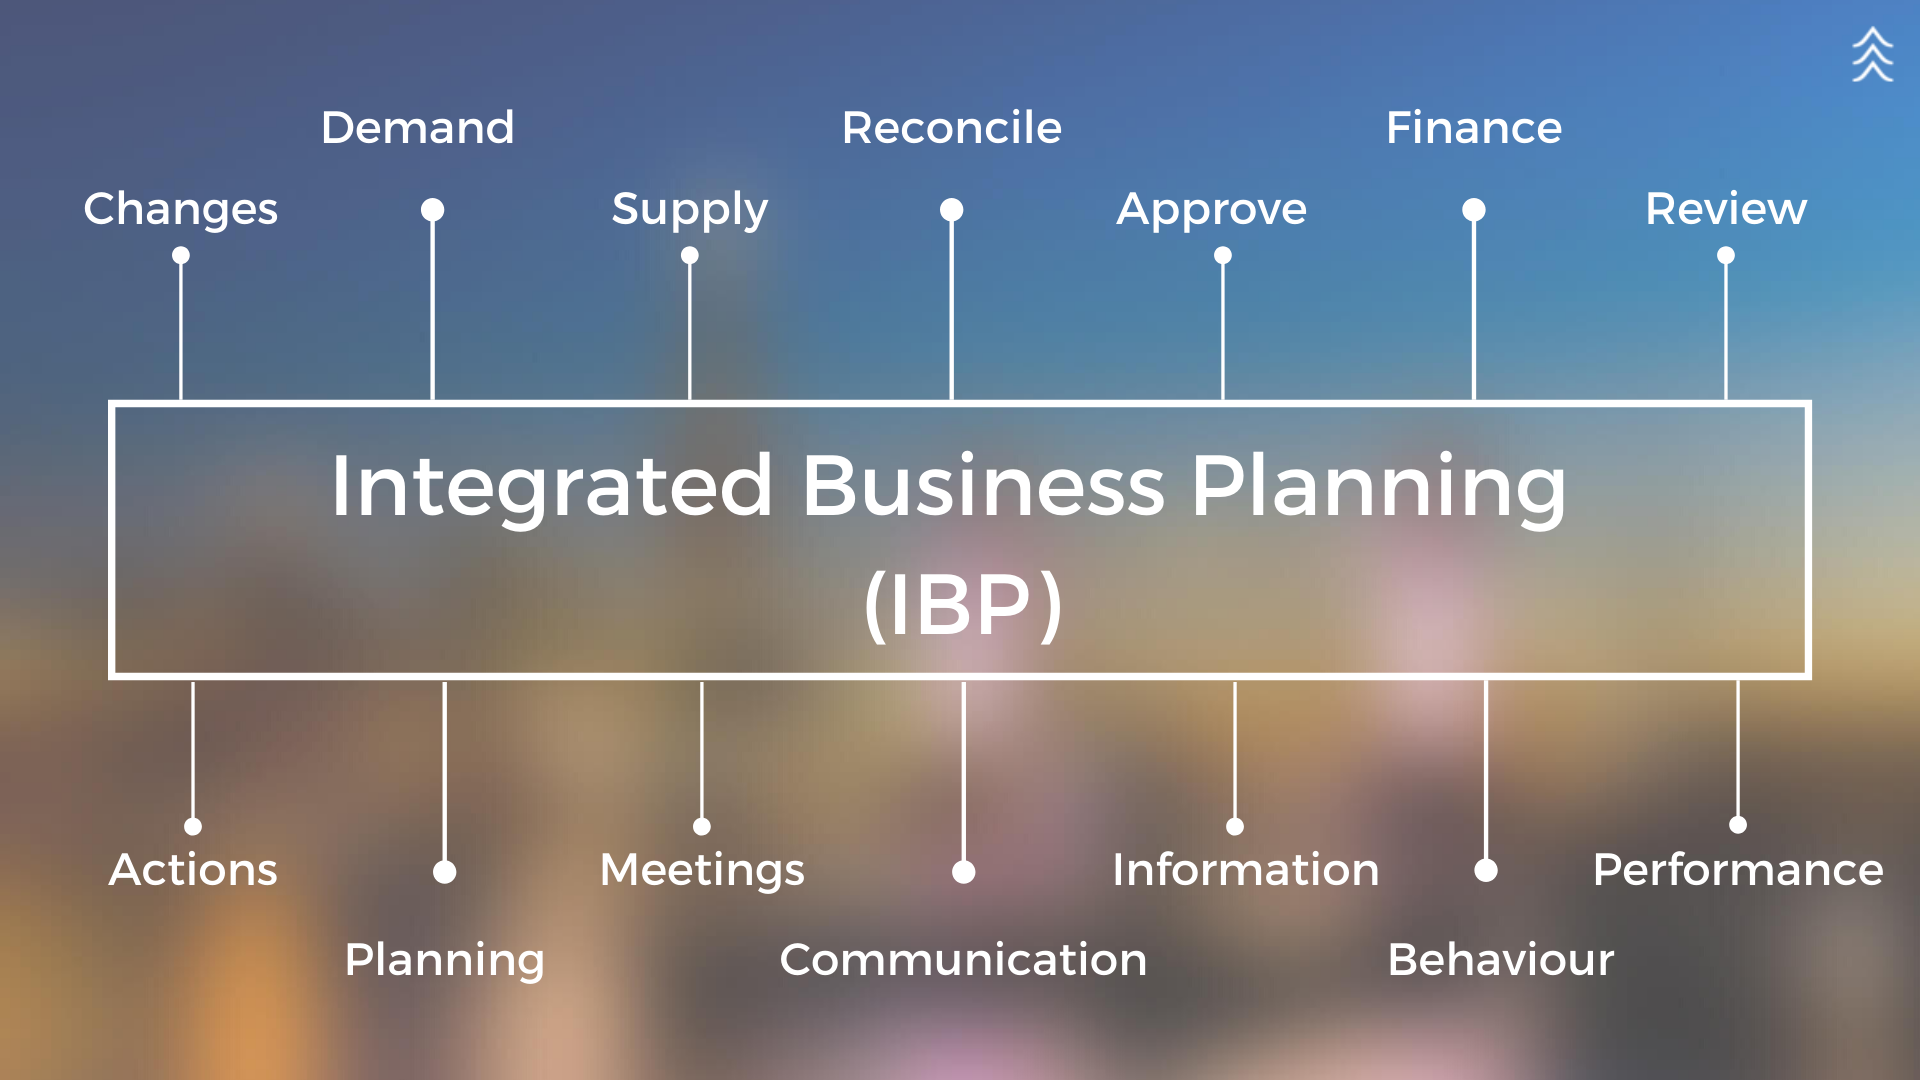 integrated business planning (ibp) helps you align